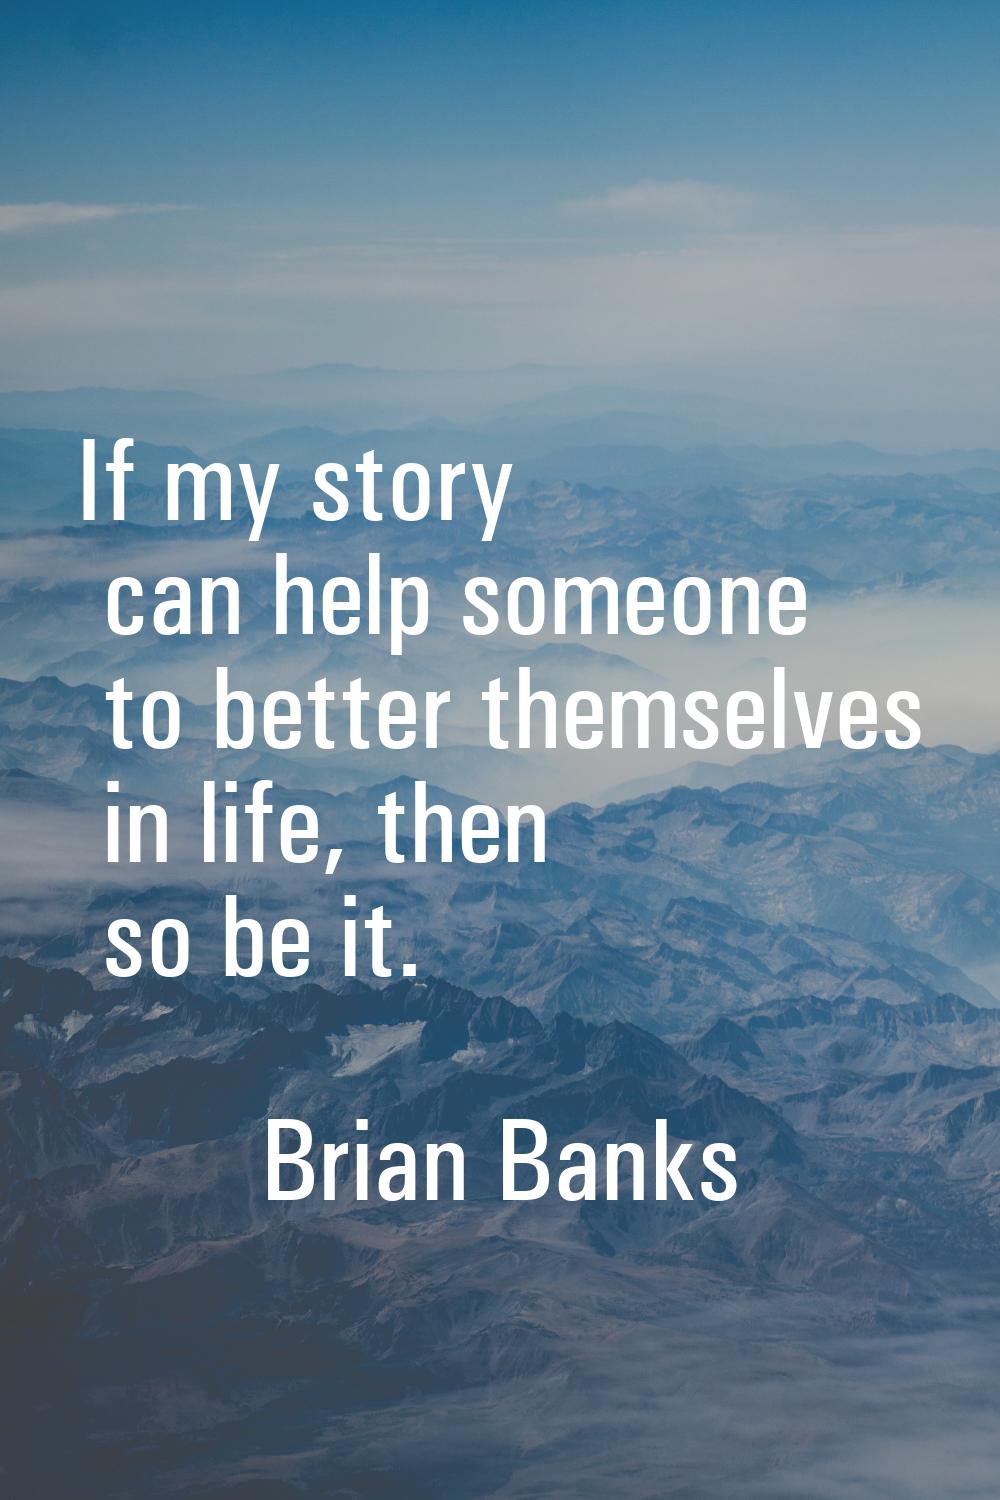 If my story can help someone to better themselves in life, then so be it.